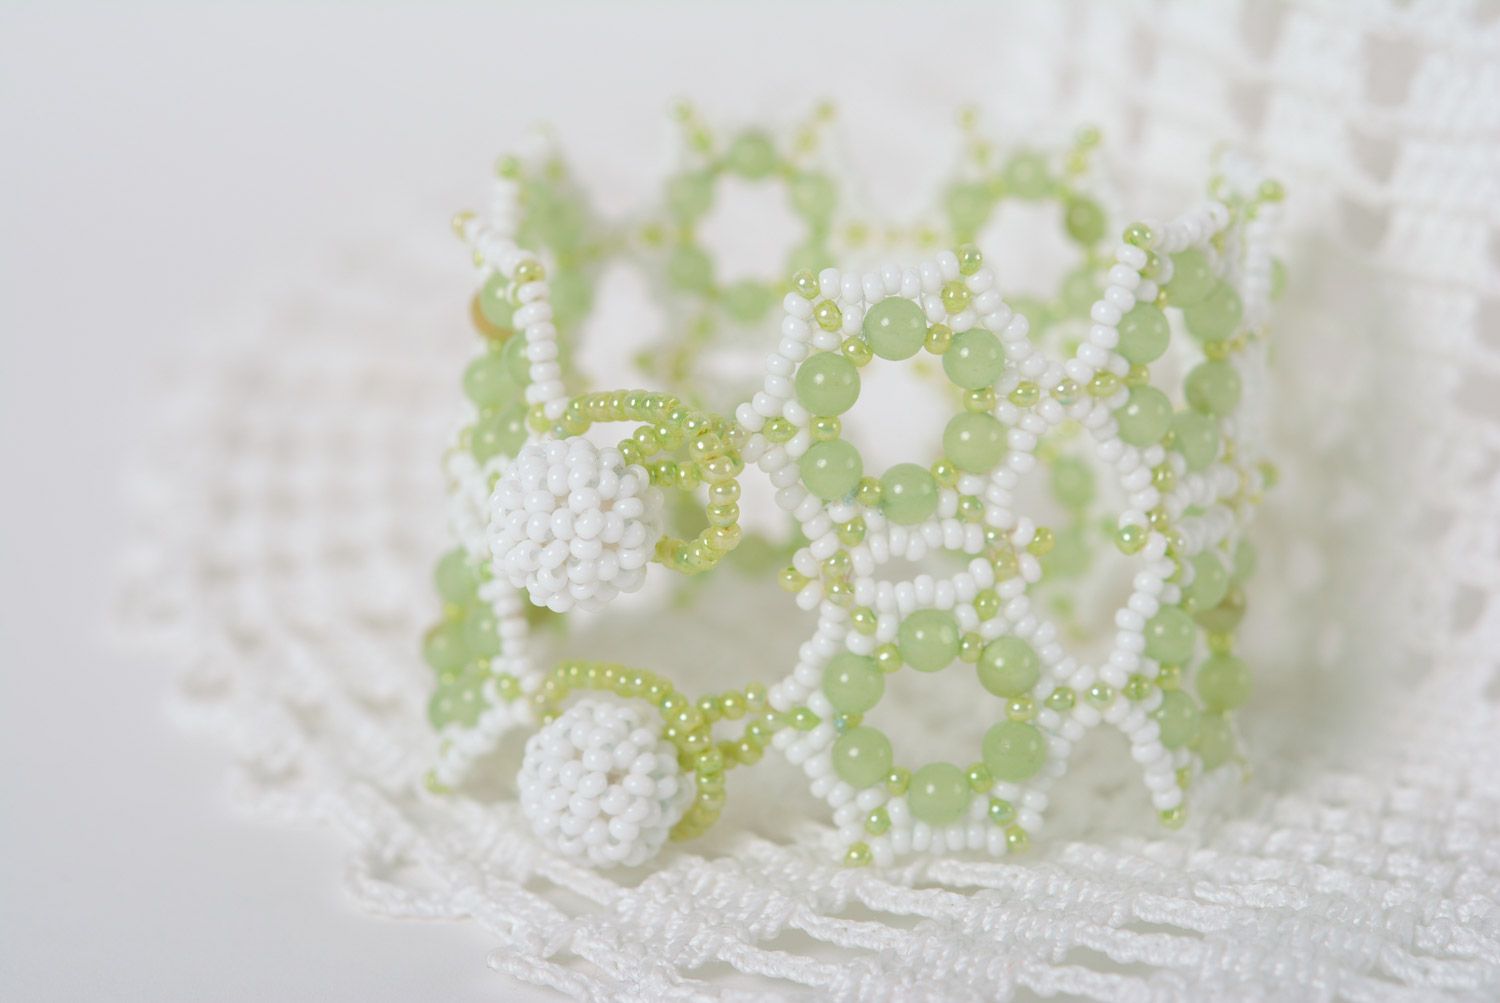 Tender wide handmade lacy wrist bracelet woven of white and light green beads photo 1